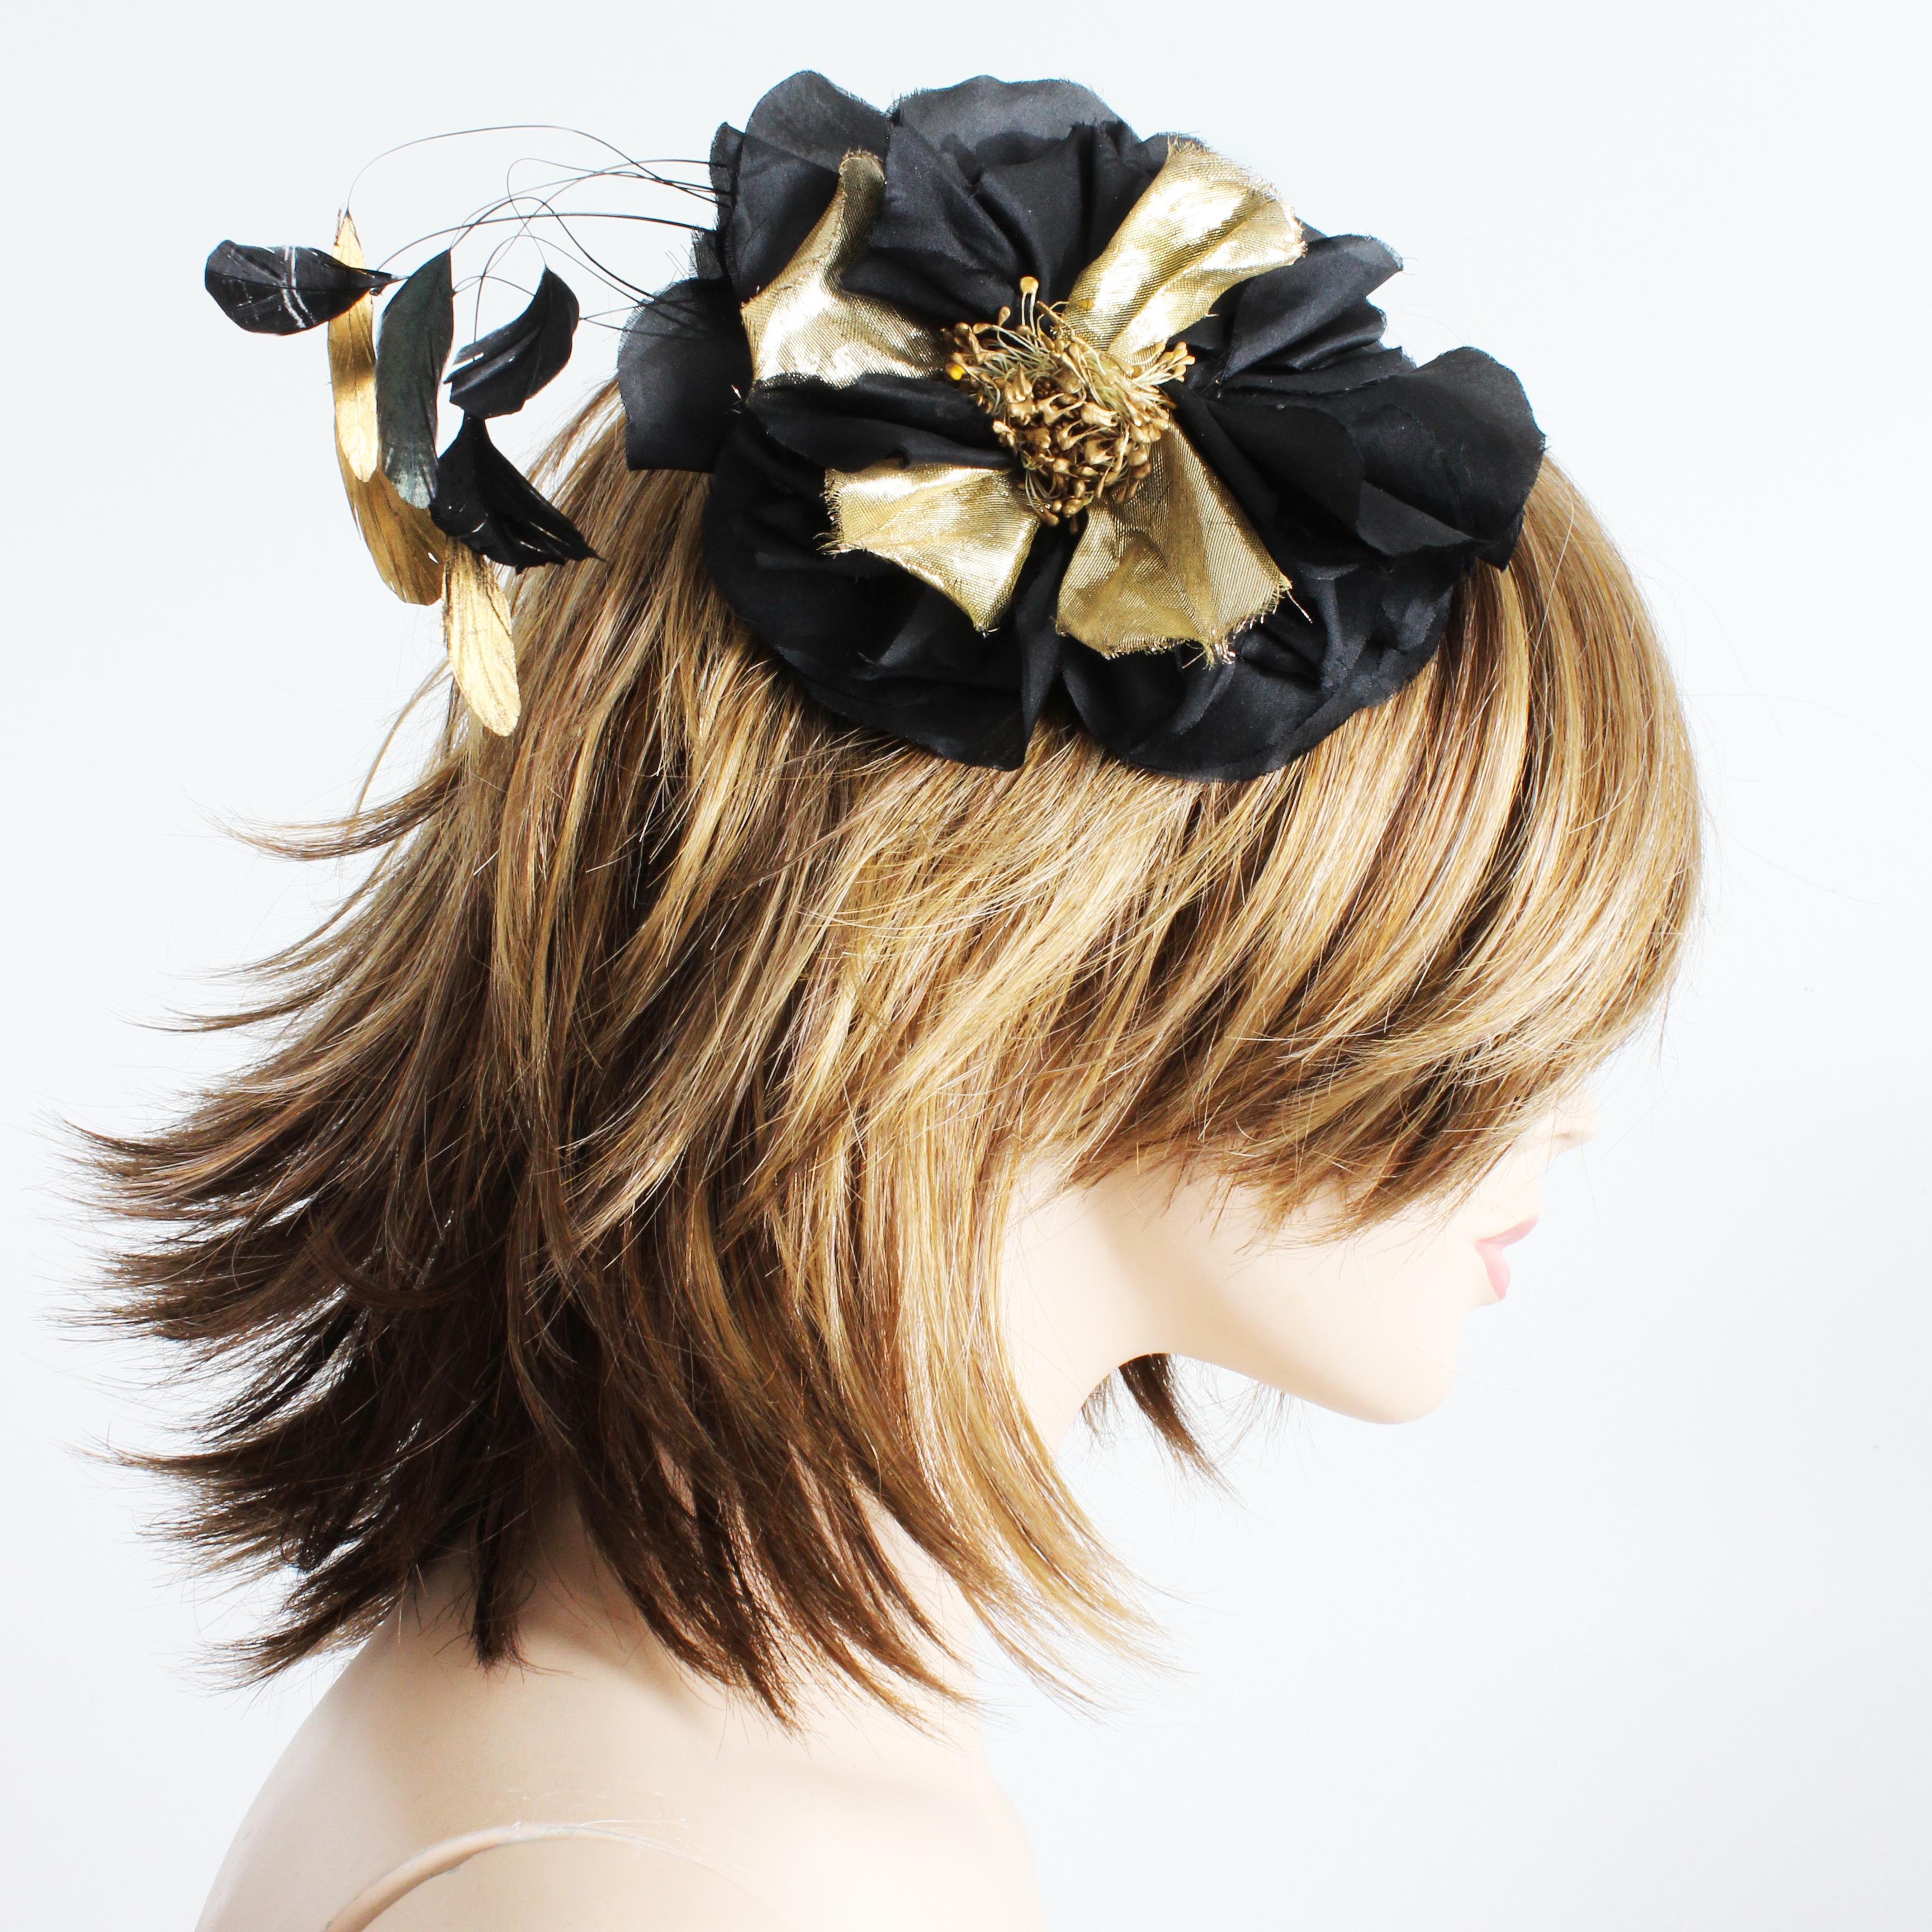 Yves Saint Laurent Decorative Head Piece Hair Comb Flower and Feathers Rare 70s In Good Condition For Sale In Port Saint Lucie, FL